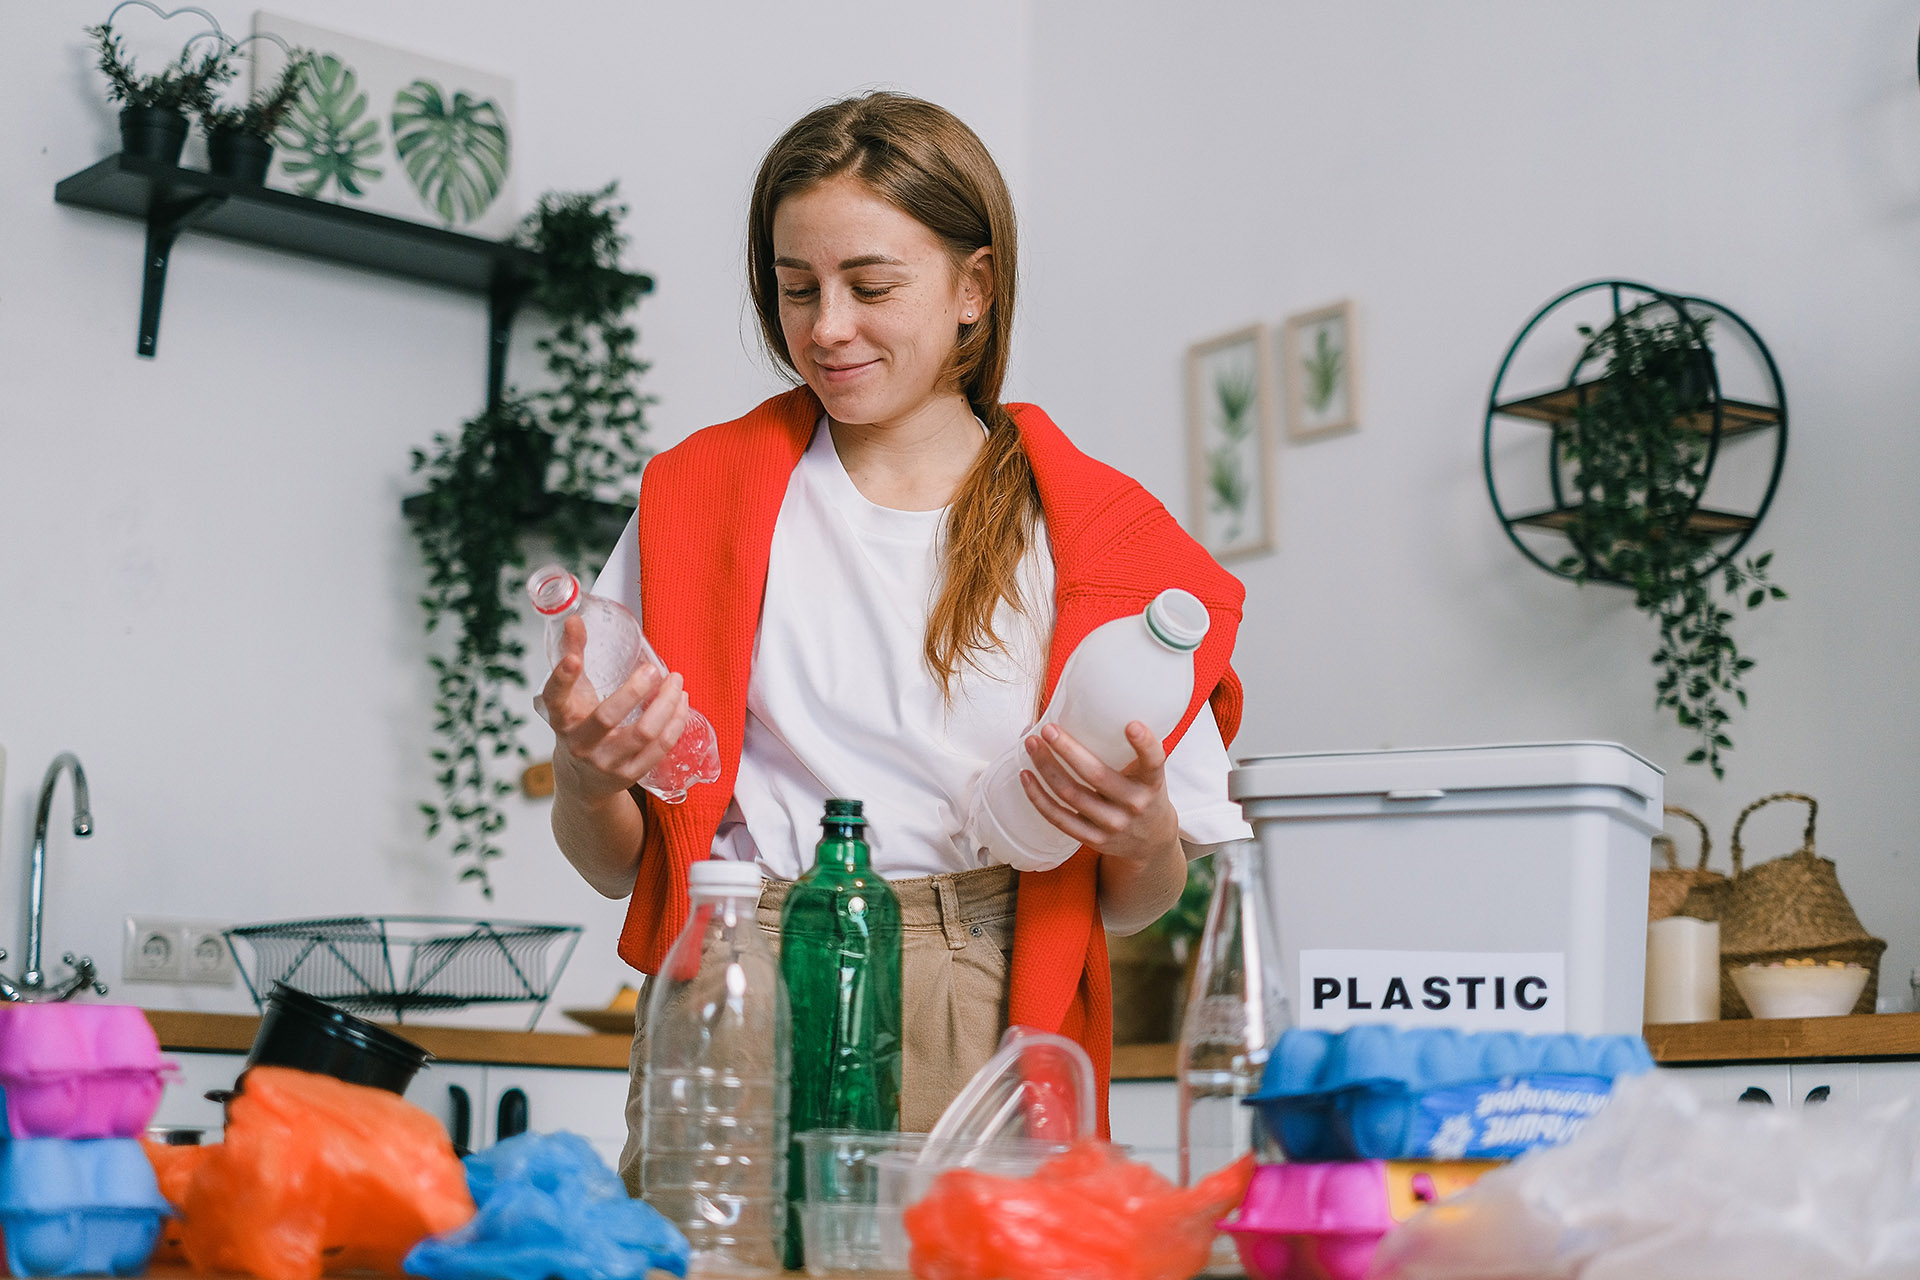 10 Ways to Use Less Plastic